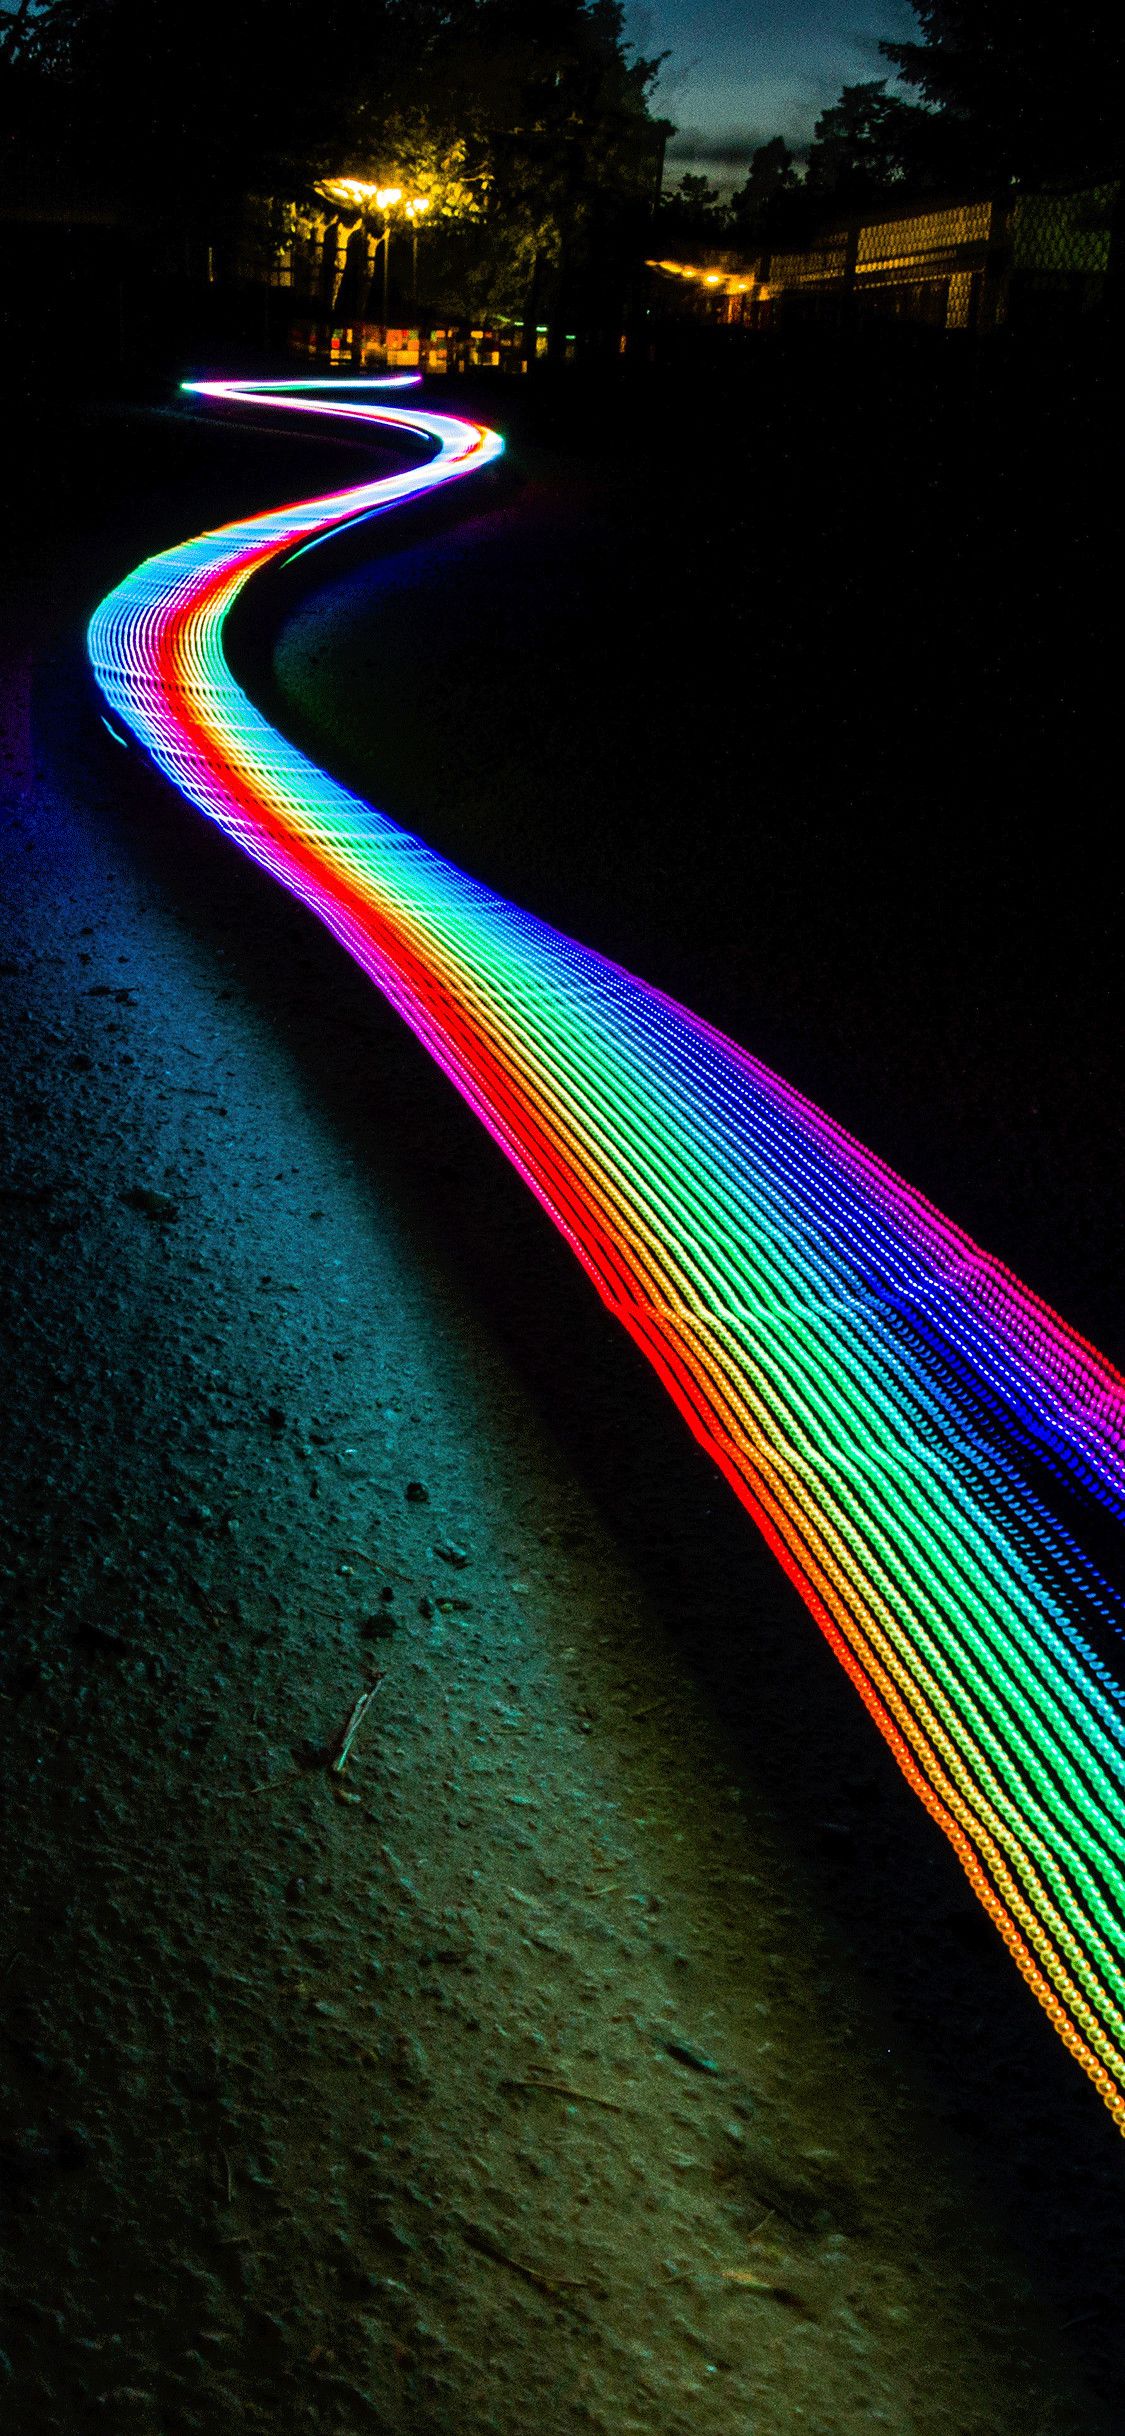 A rainbow colored light on the ground - Neon